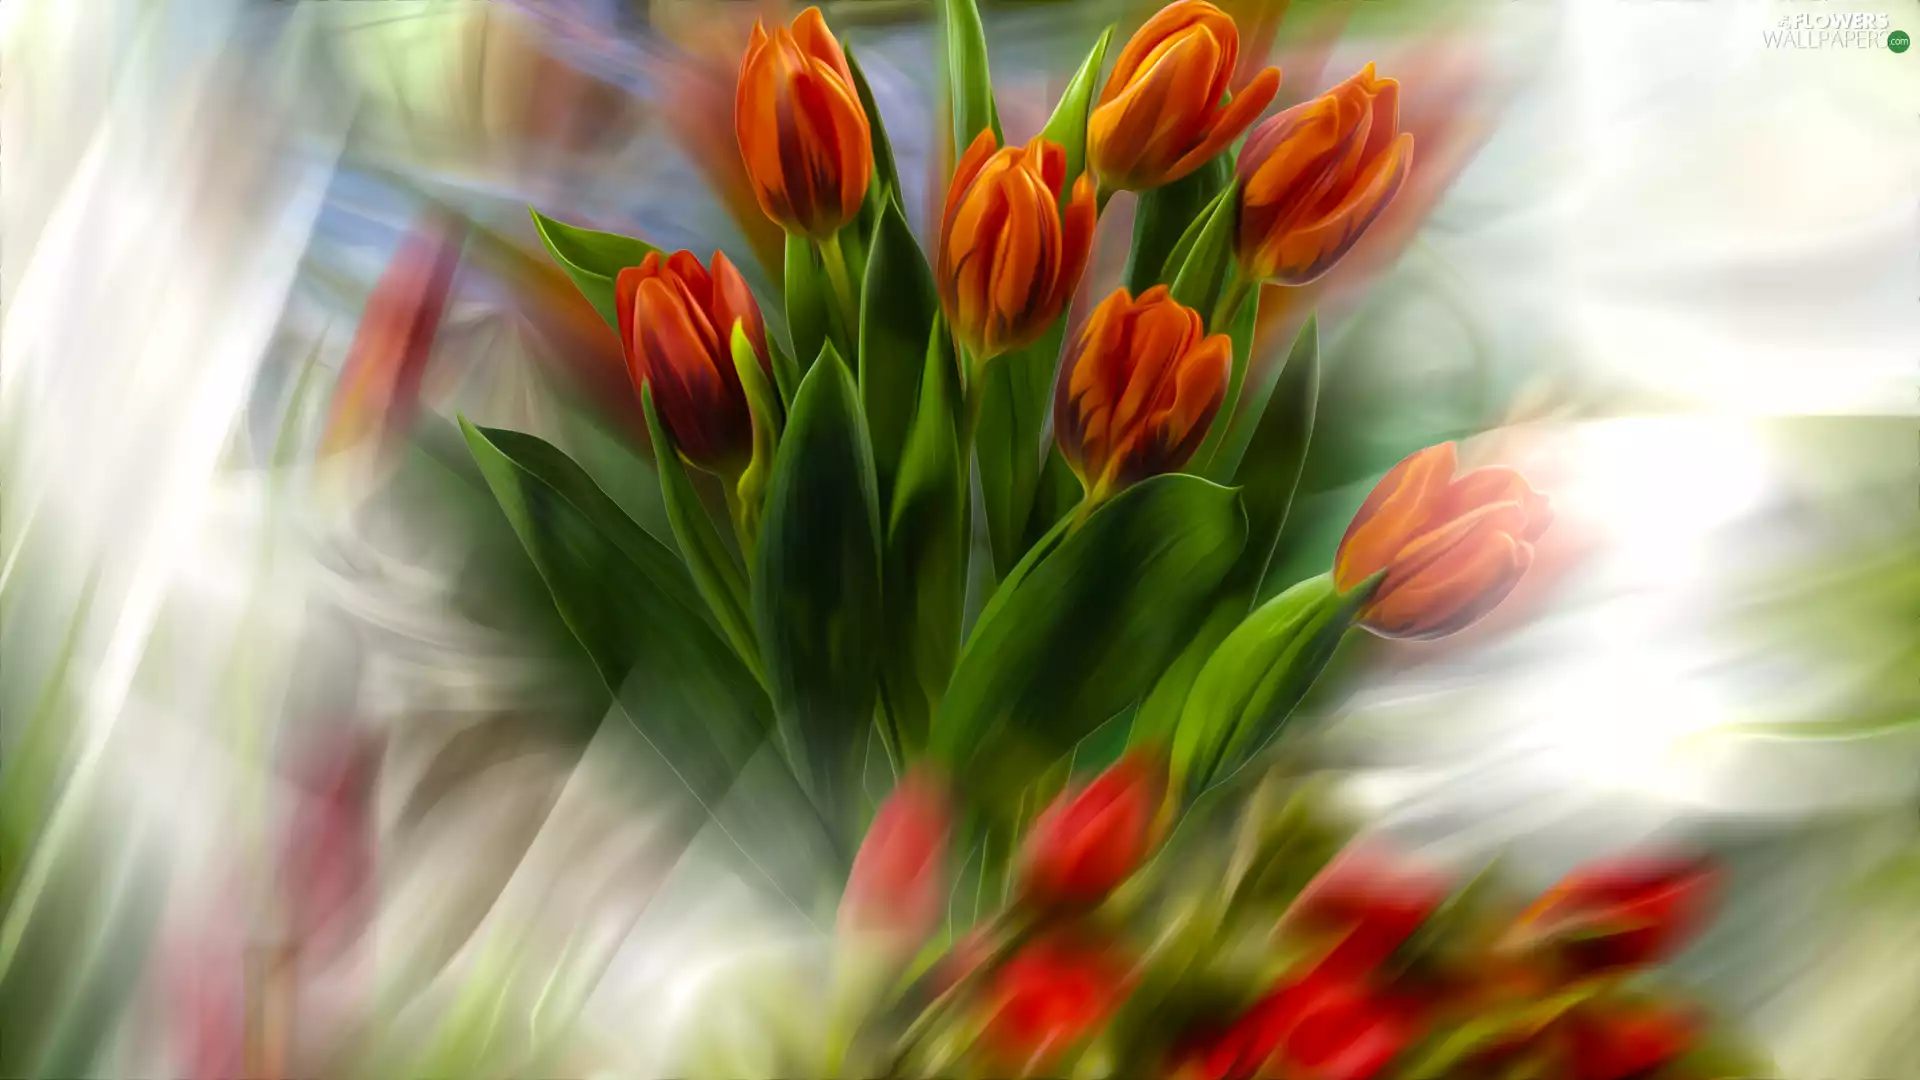 Tulips, graphics, blurry background, bouquet